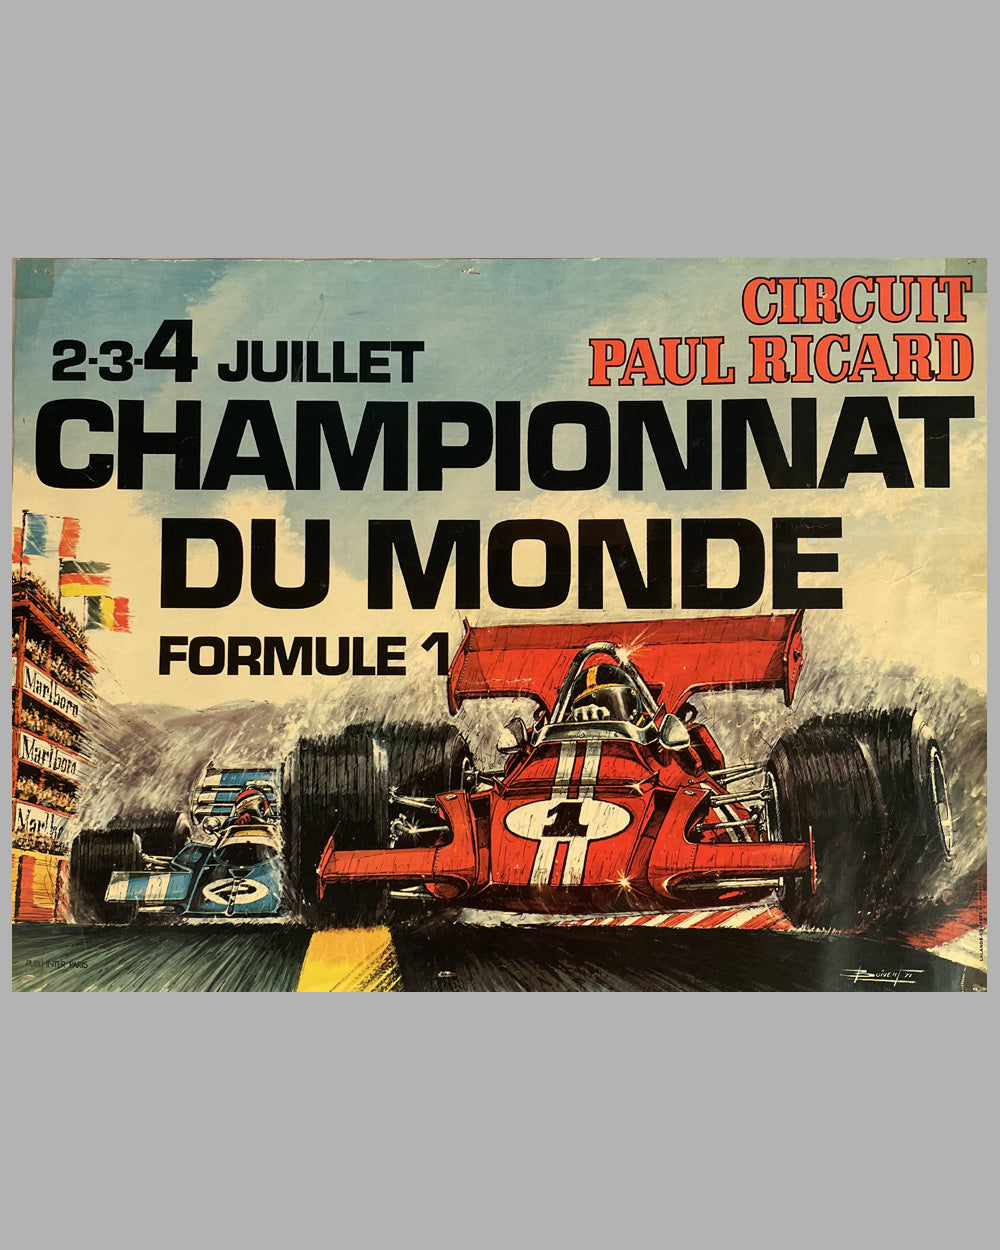 1971 Grand Prix of France original and official poster by Boivent